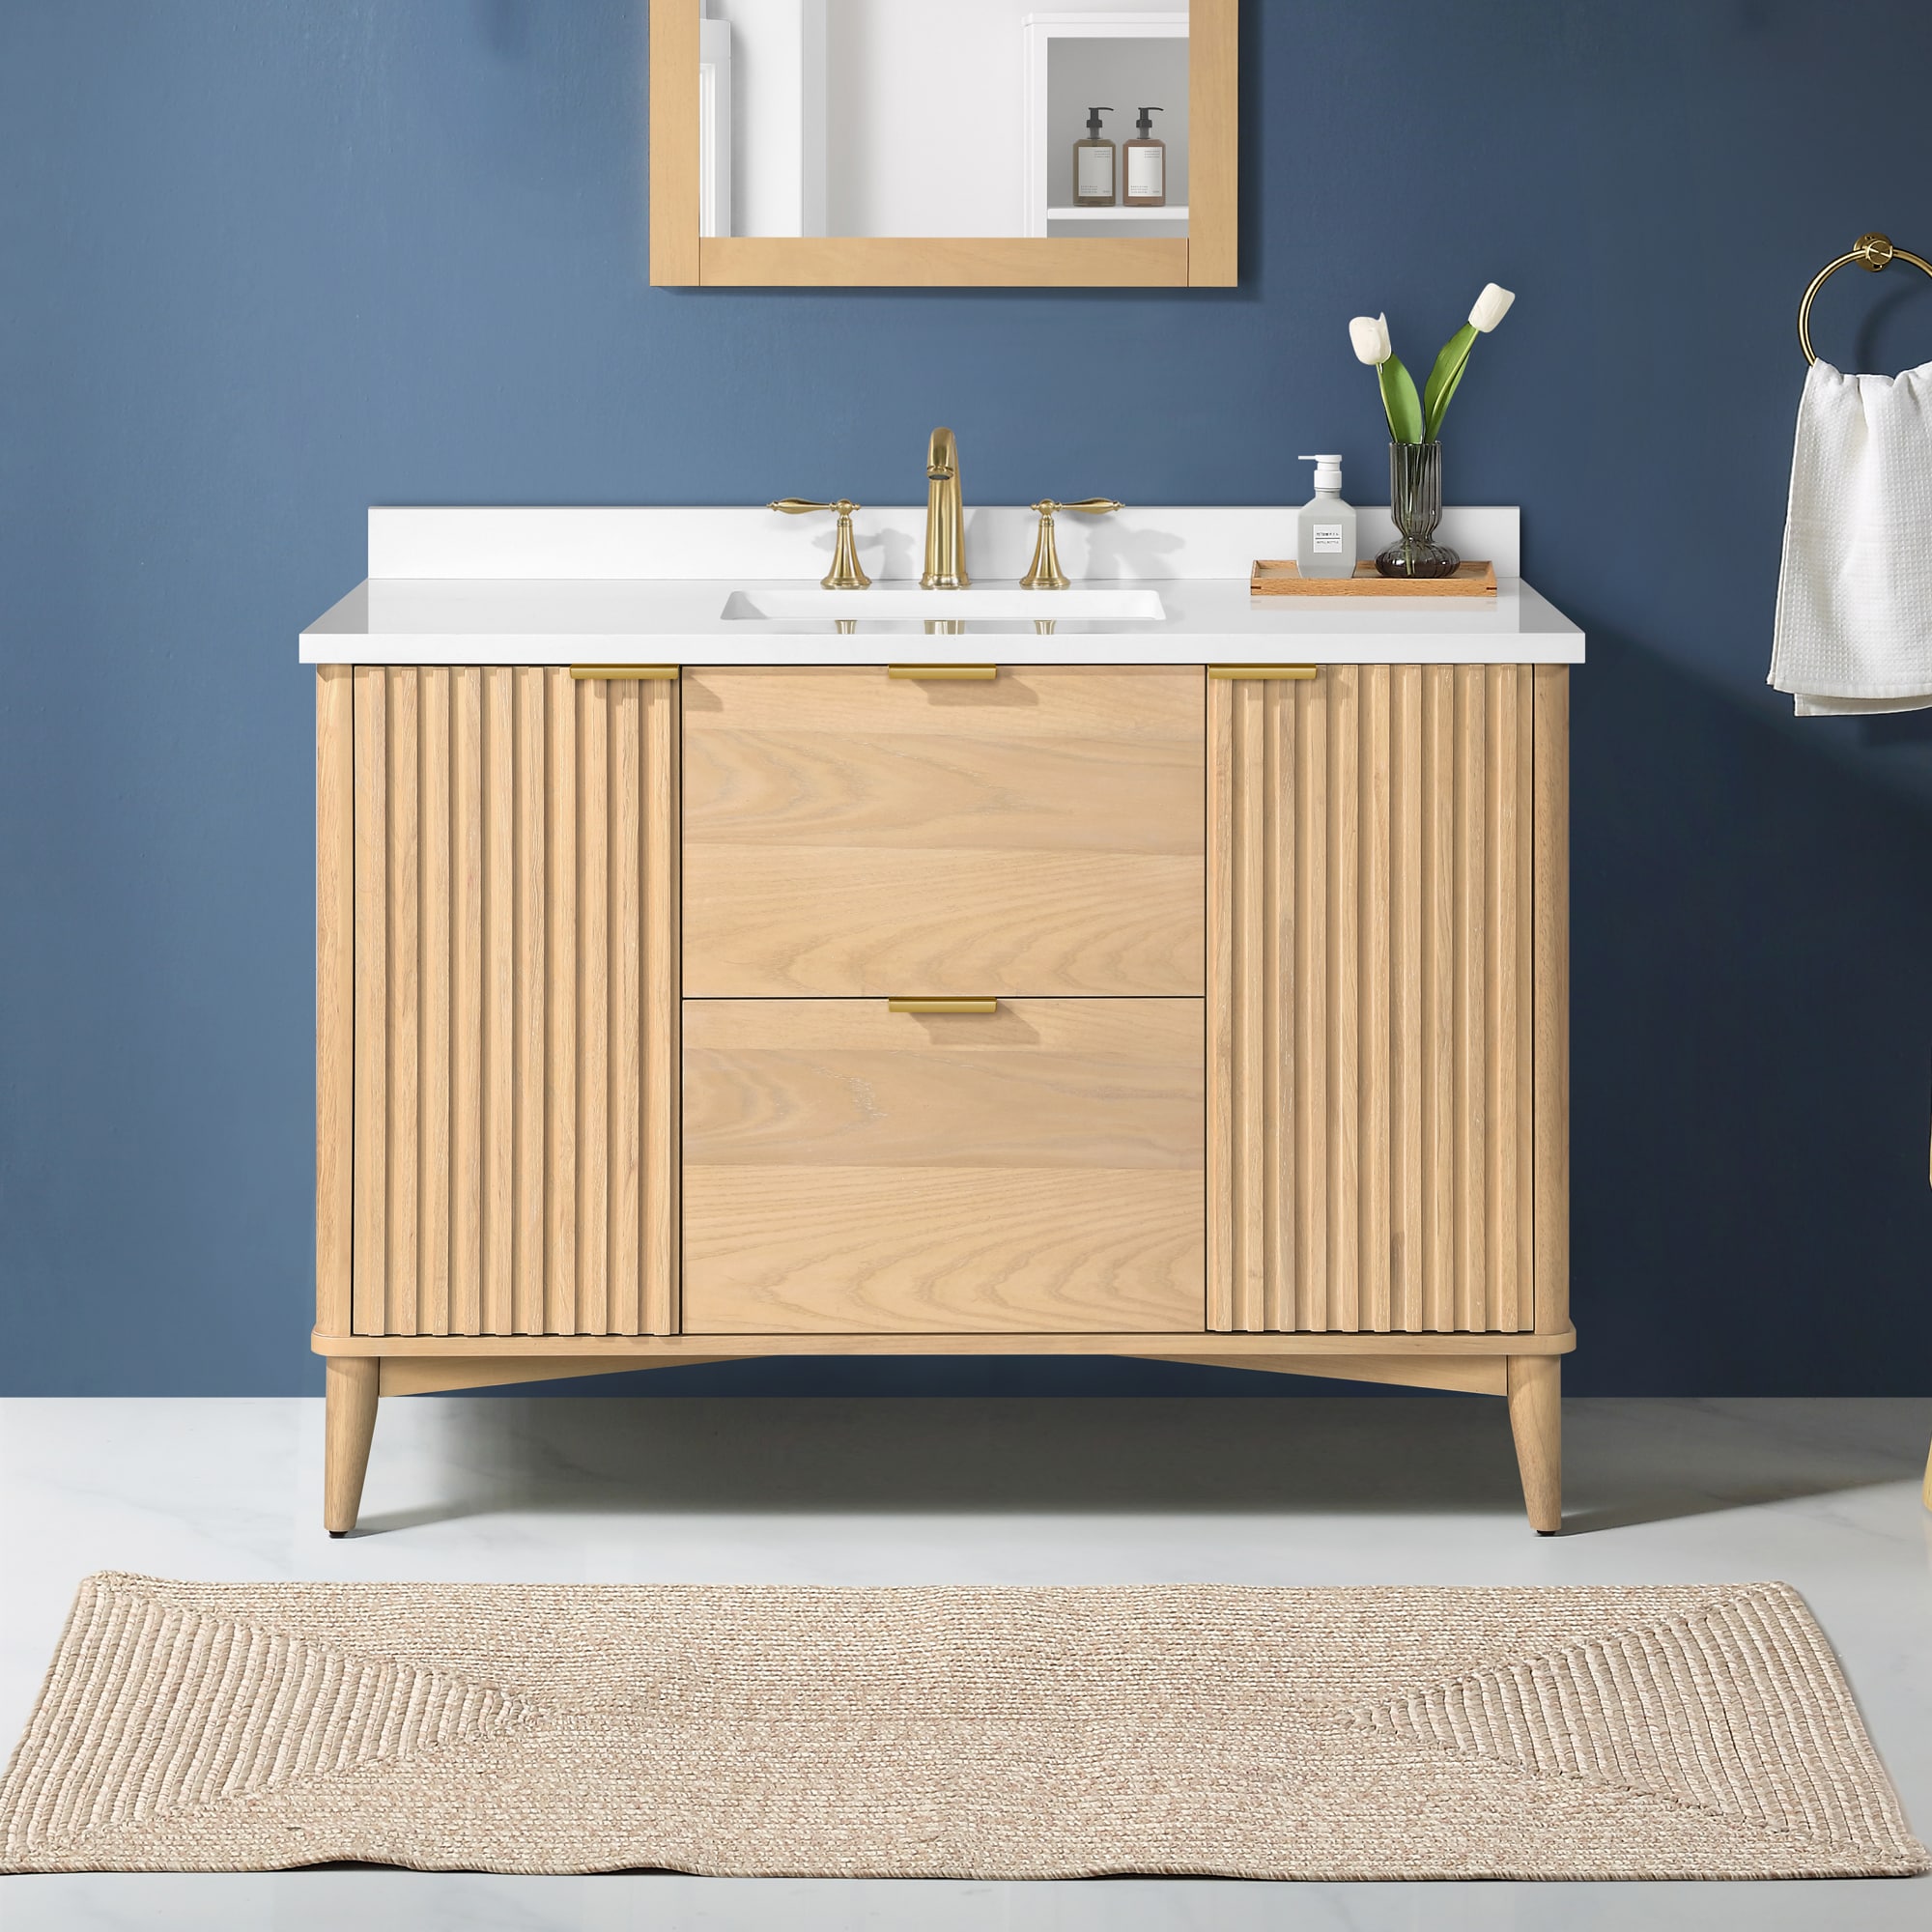 Project Source Unfinished 36-in Natural Rustic Oak Bathroom Vanity